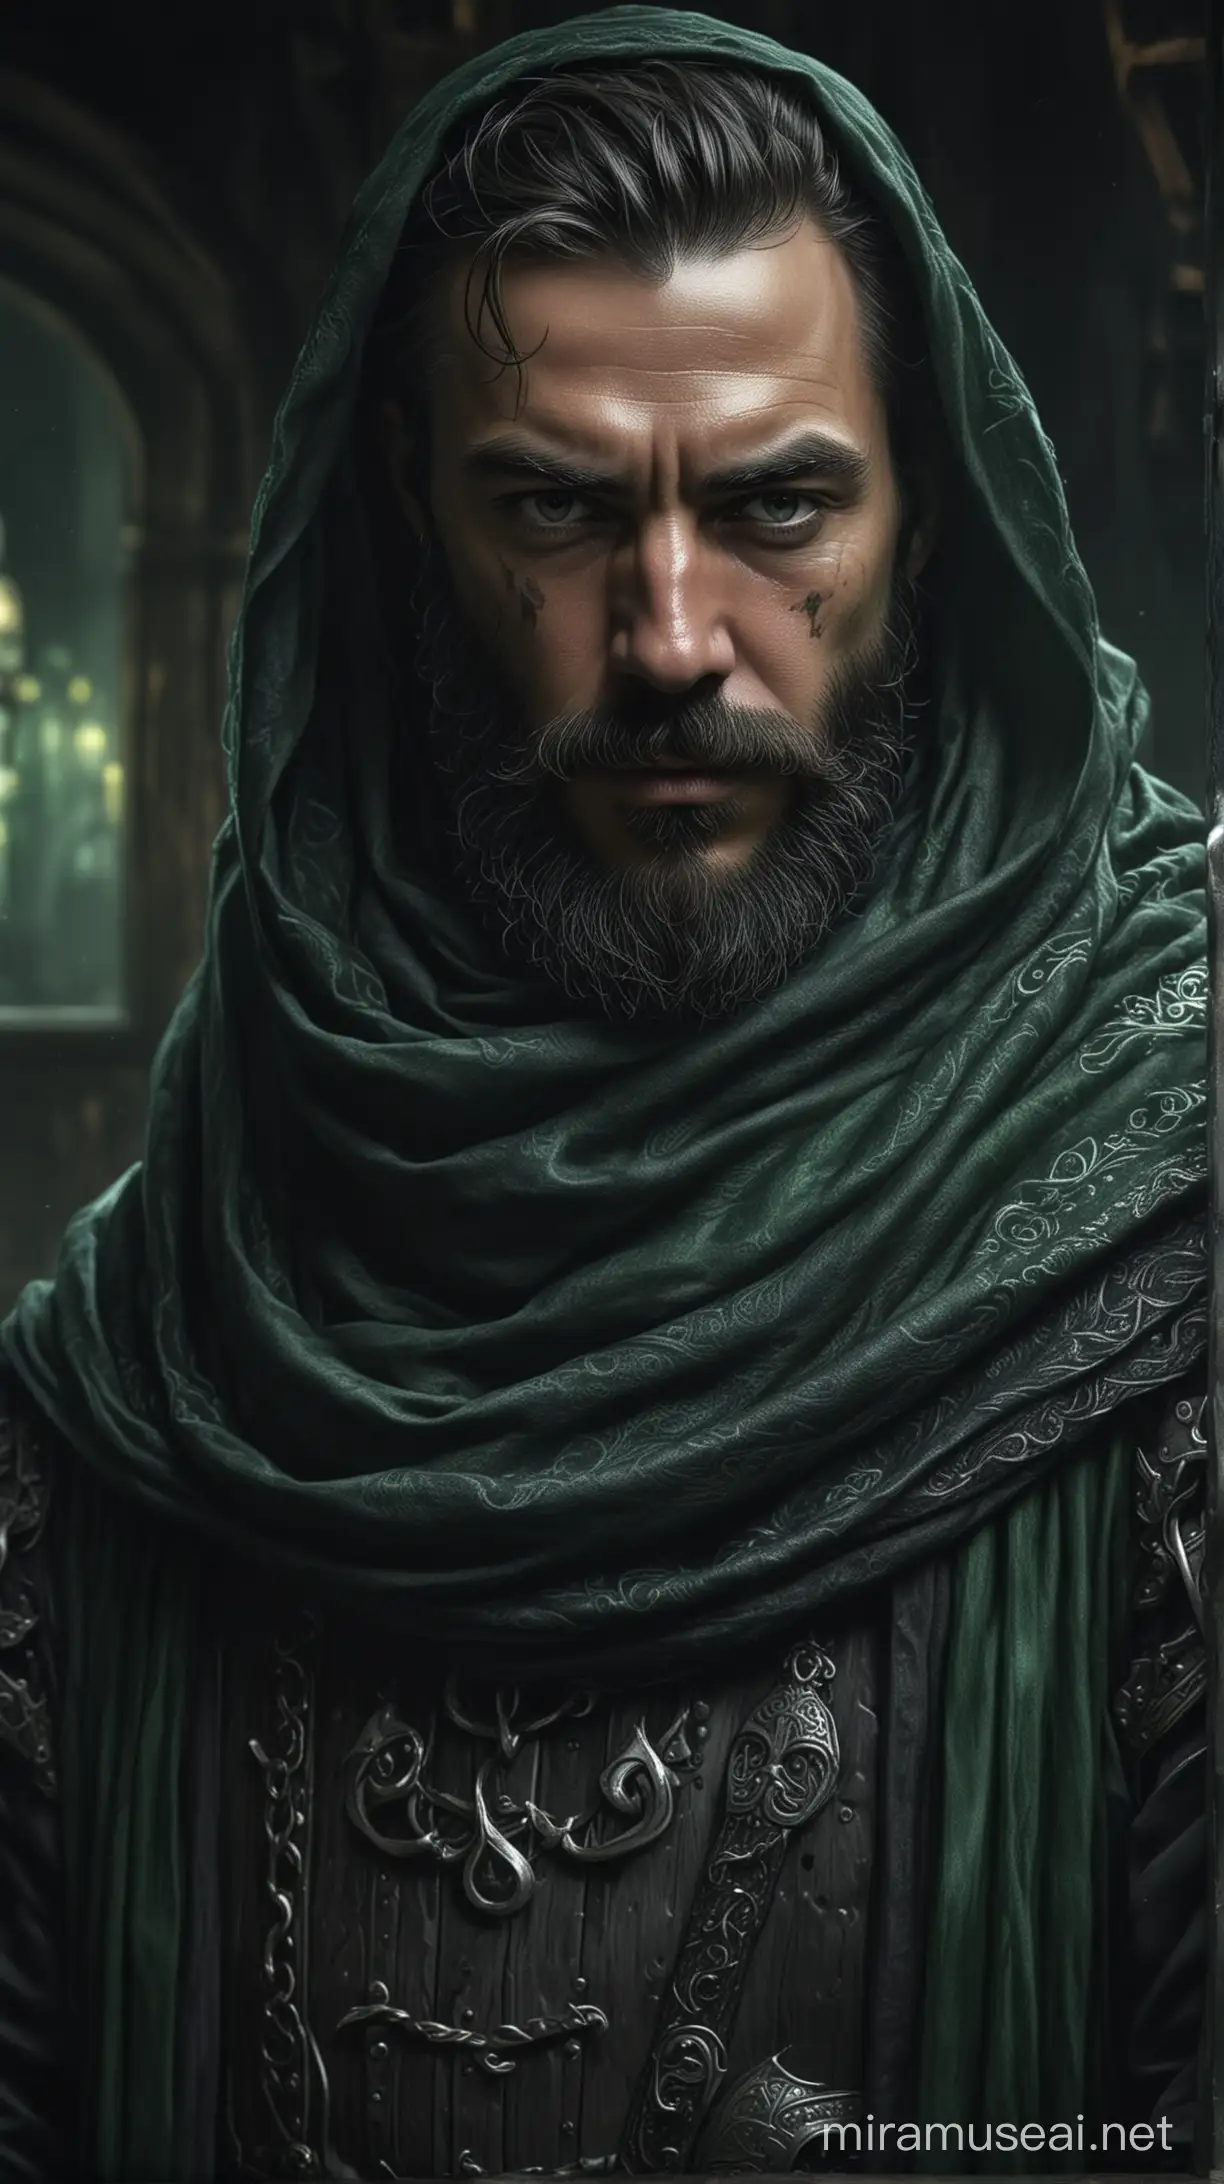 Medieval warrior clad in black battle attire, standing in his dark house made up of green glass, conceals head with scarf, his medium beard and mustache prominently displayed, foregrounded by a close-up, heightened tension, digital painting, ultra fine details, atmospheric mood